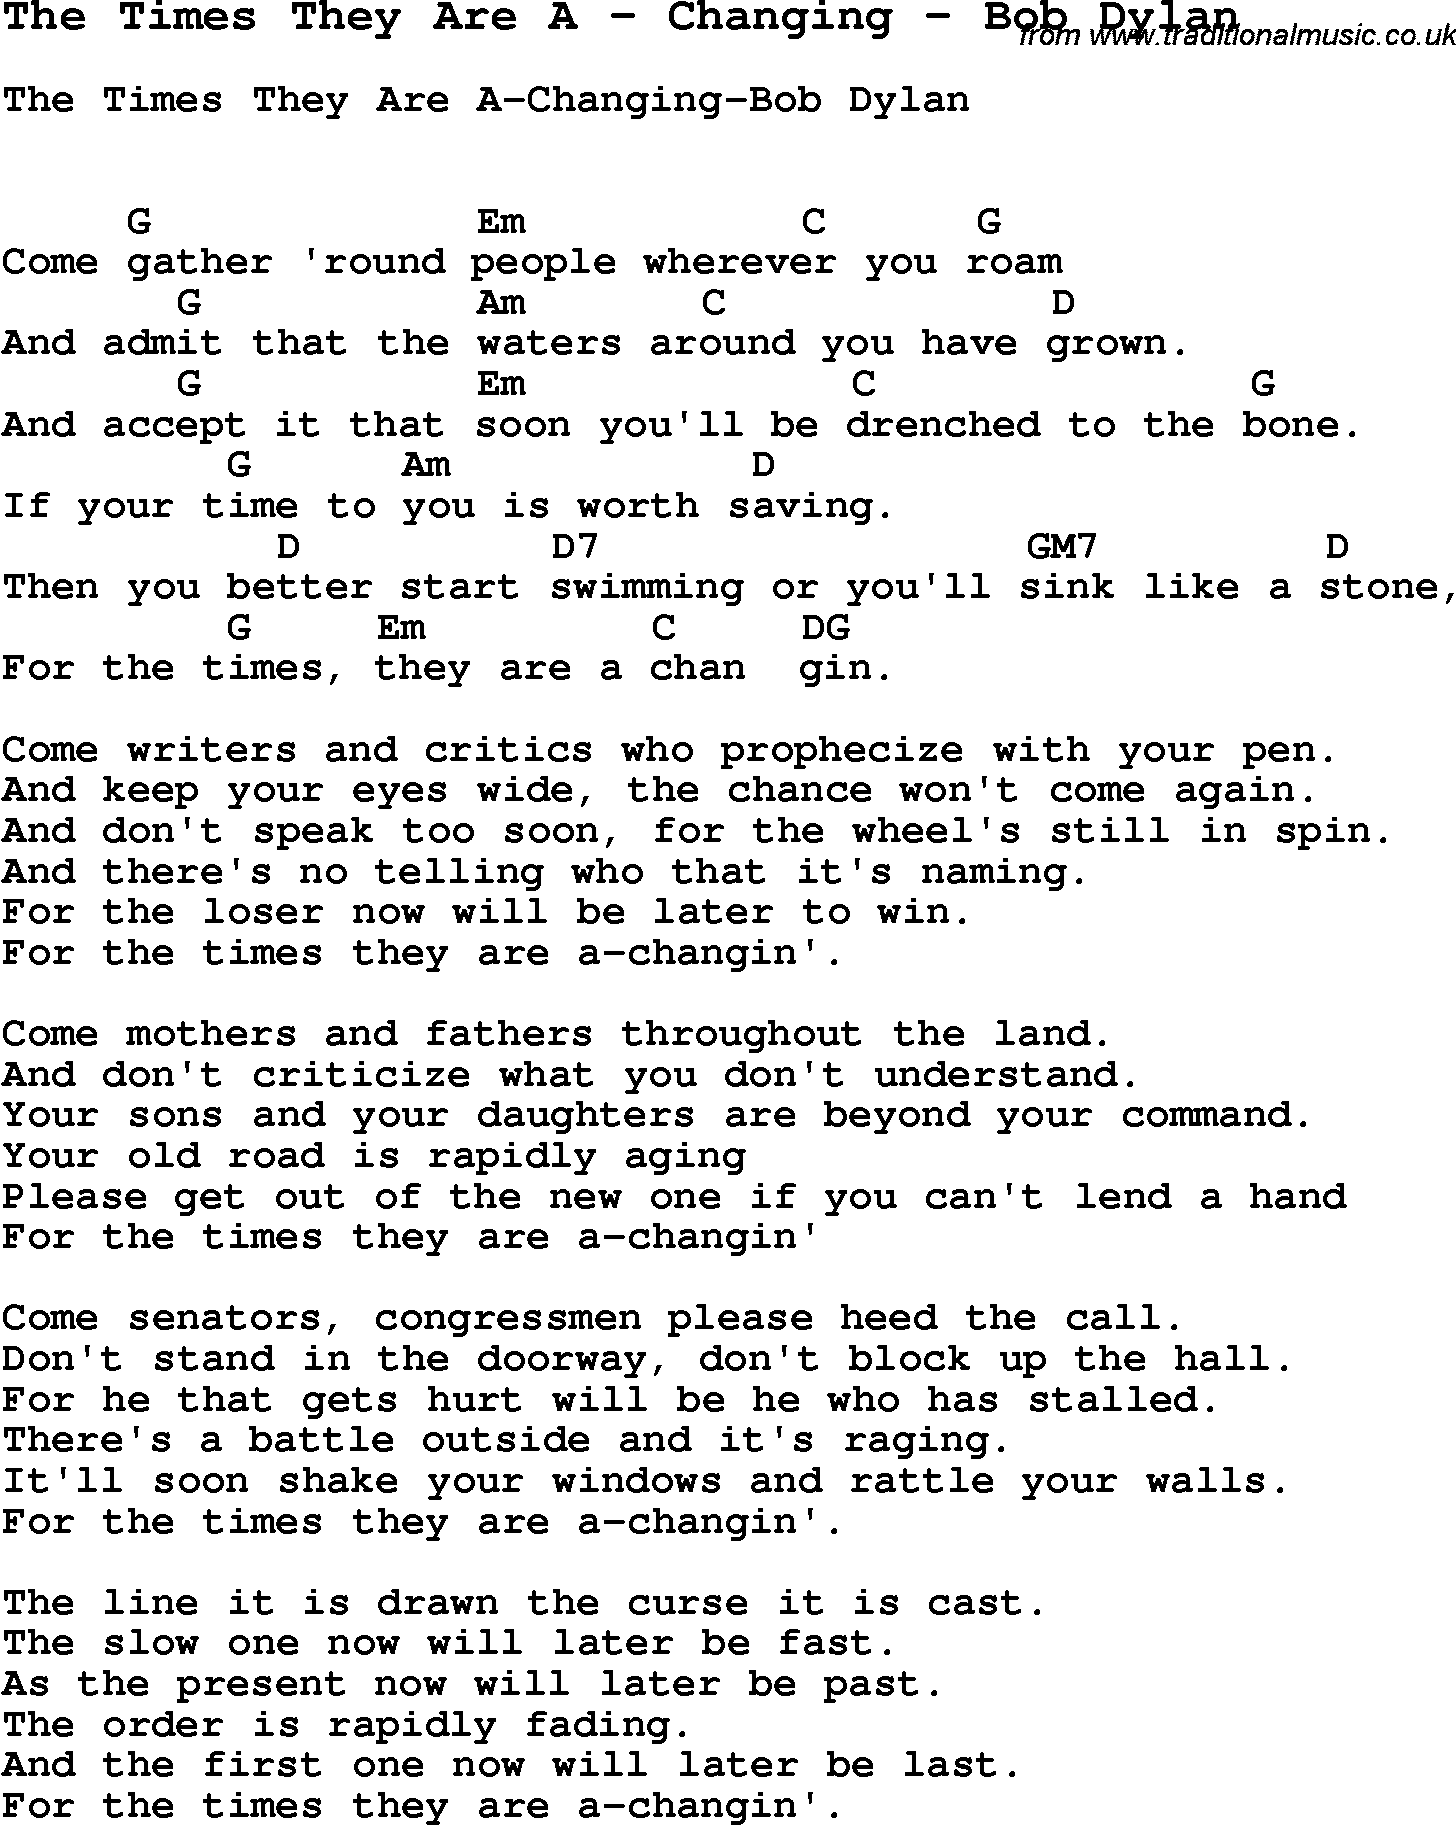 Song The Times They Are A by Changing by Bob Dylan, with lyrics for vocal performance and accompaniment chords for Ukulele, Guitar Banjo etc.